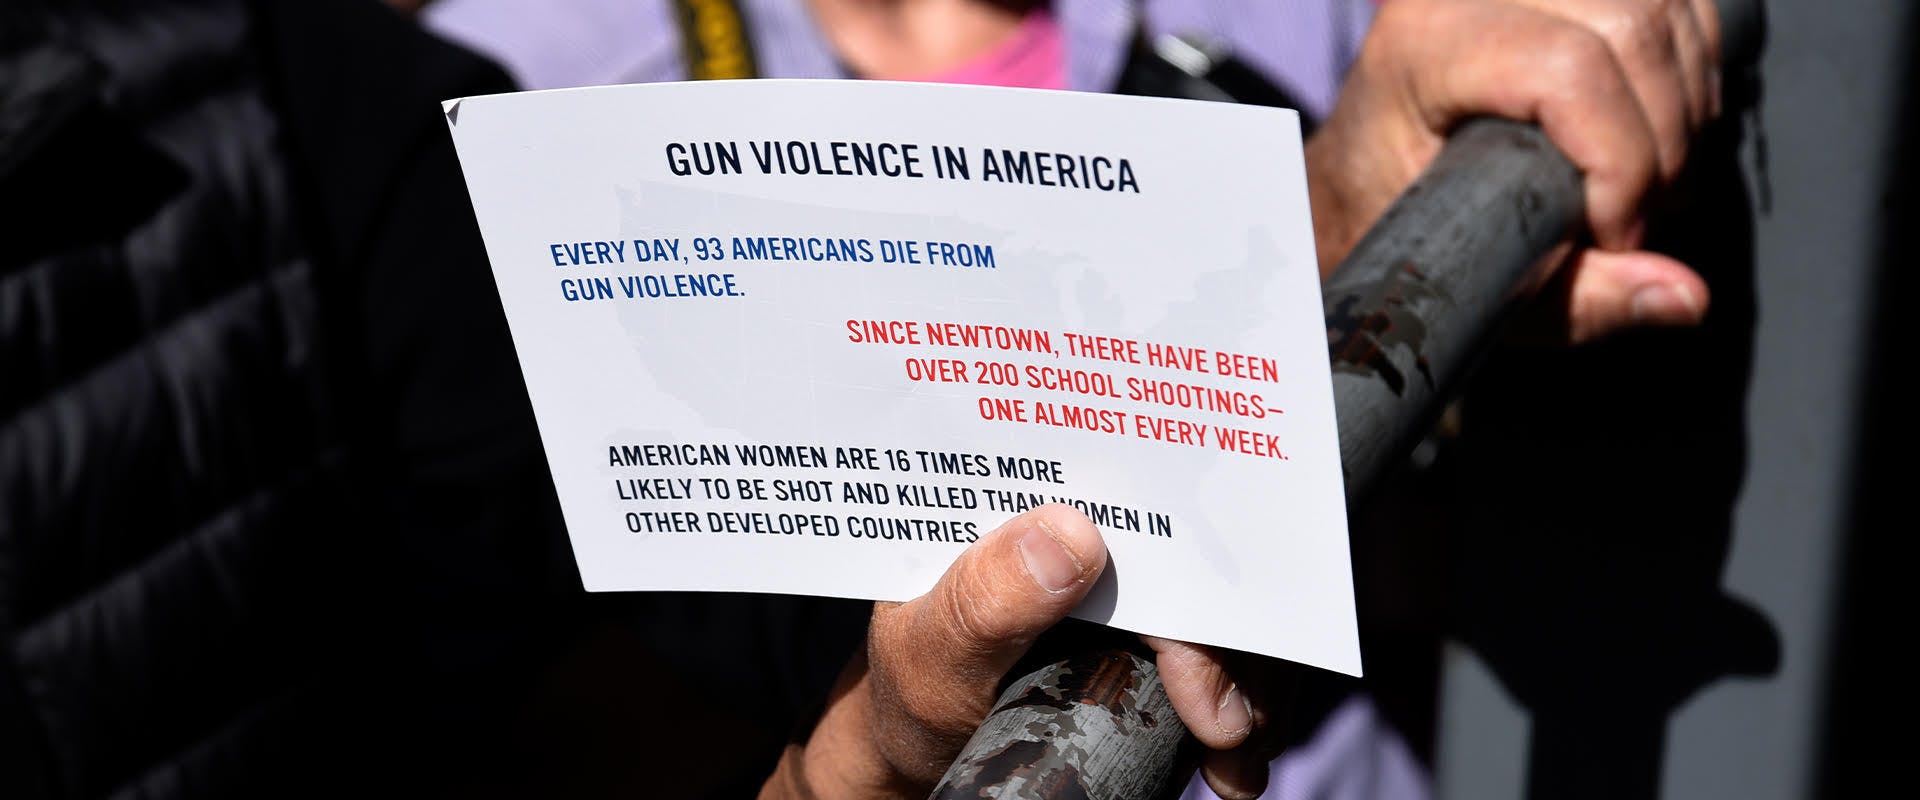 A photograph with a sign showing the prevalence of gun violence in the United States